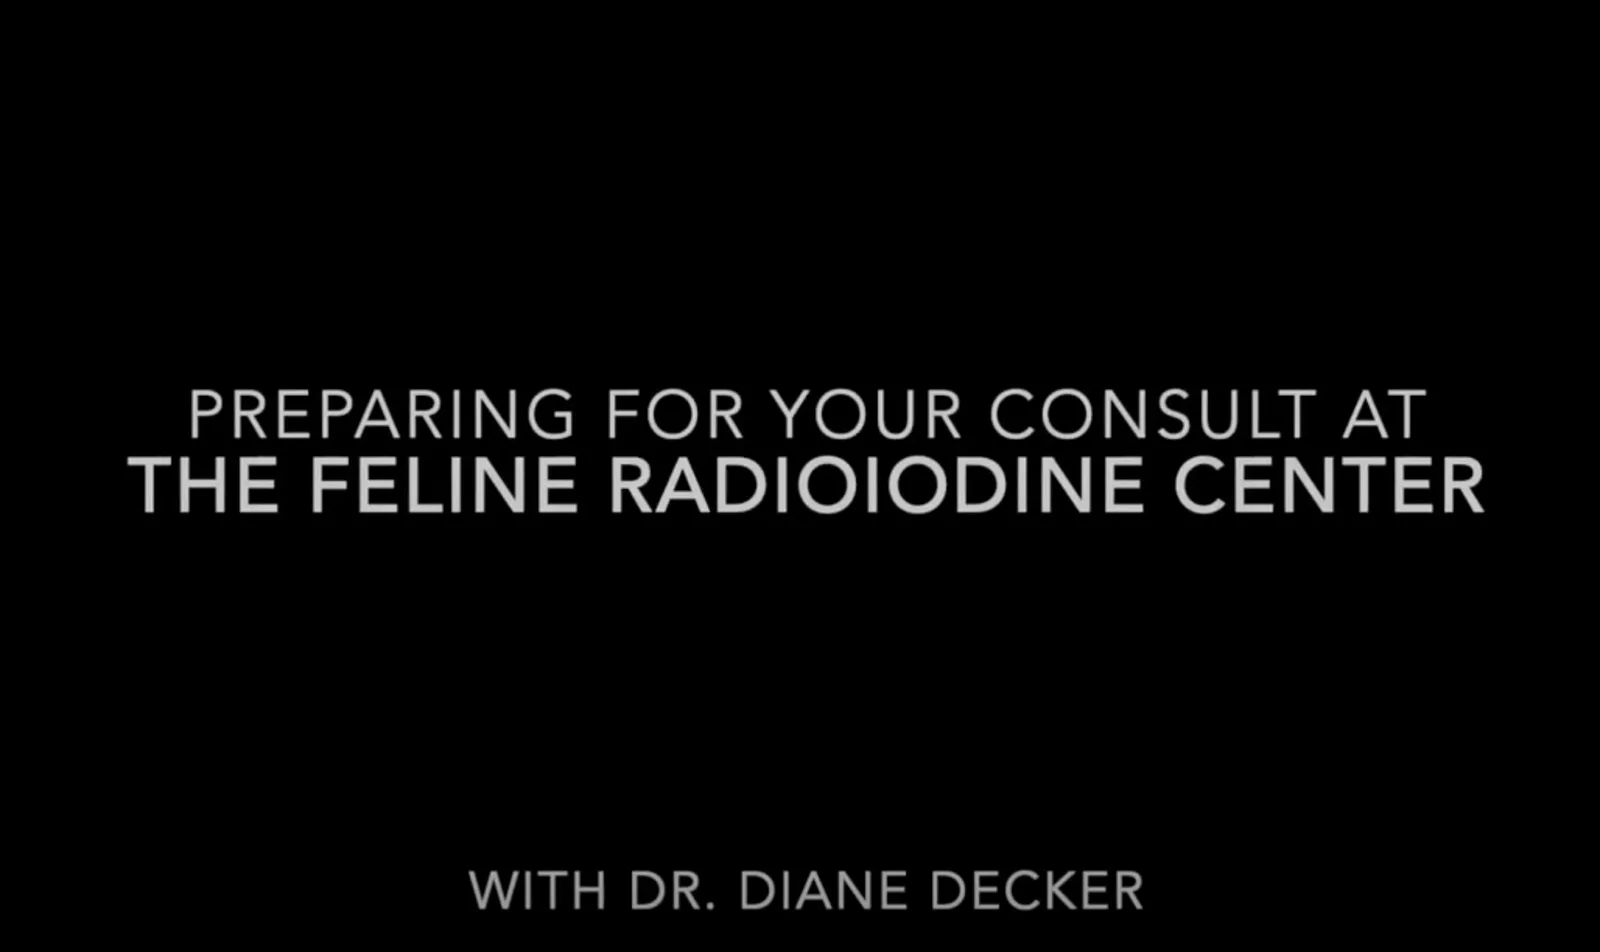 Preparing For Your Consult At The Feline Radioiodine Center with Dr. Diane Decker